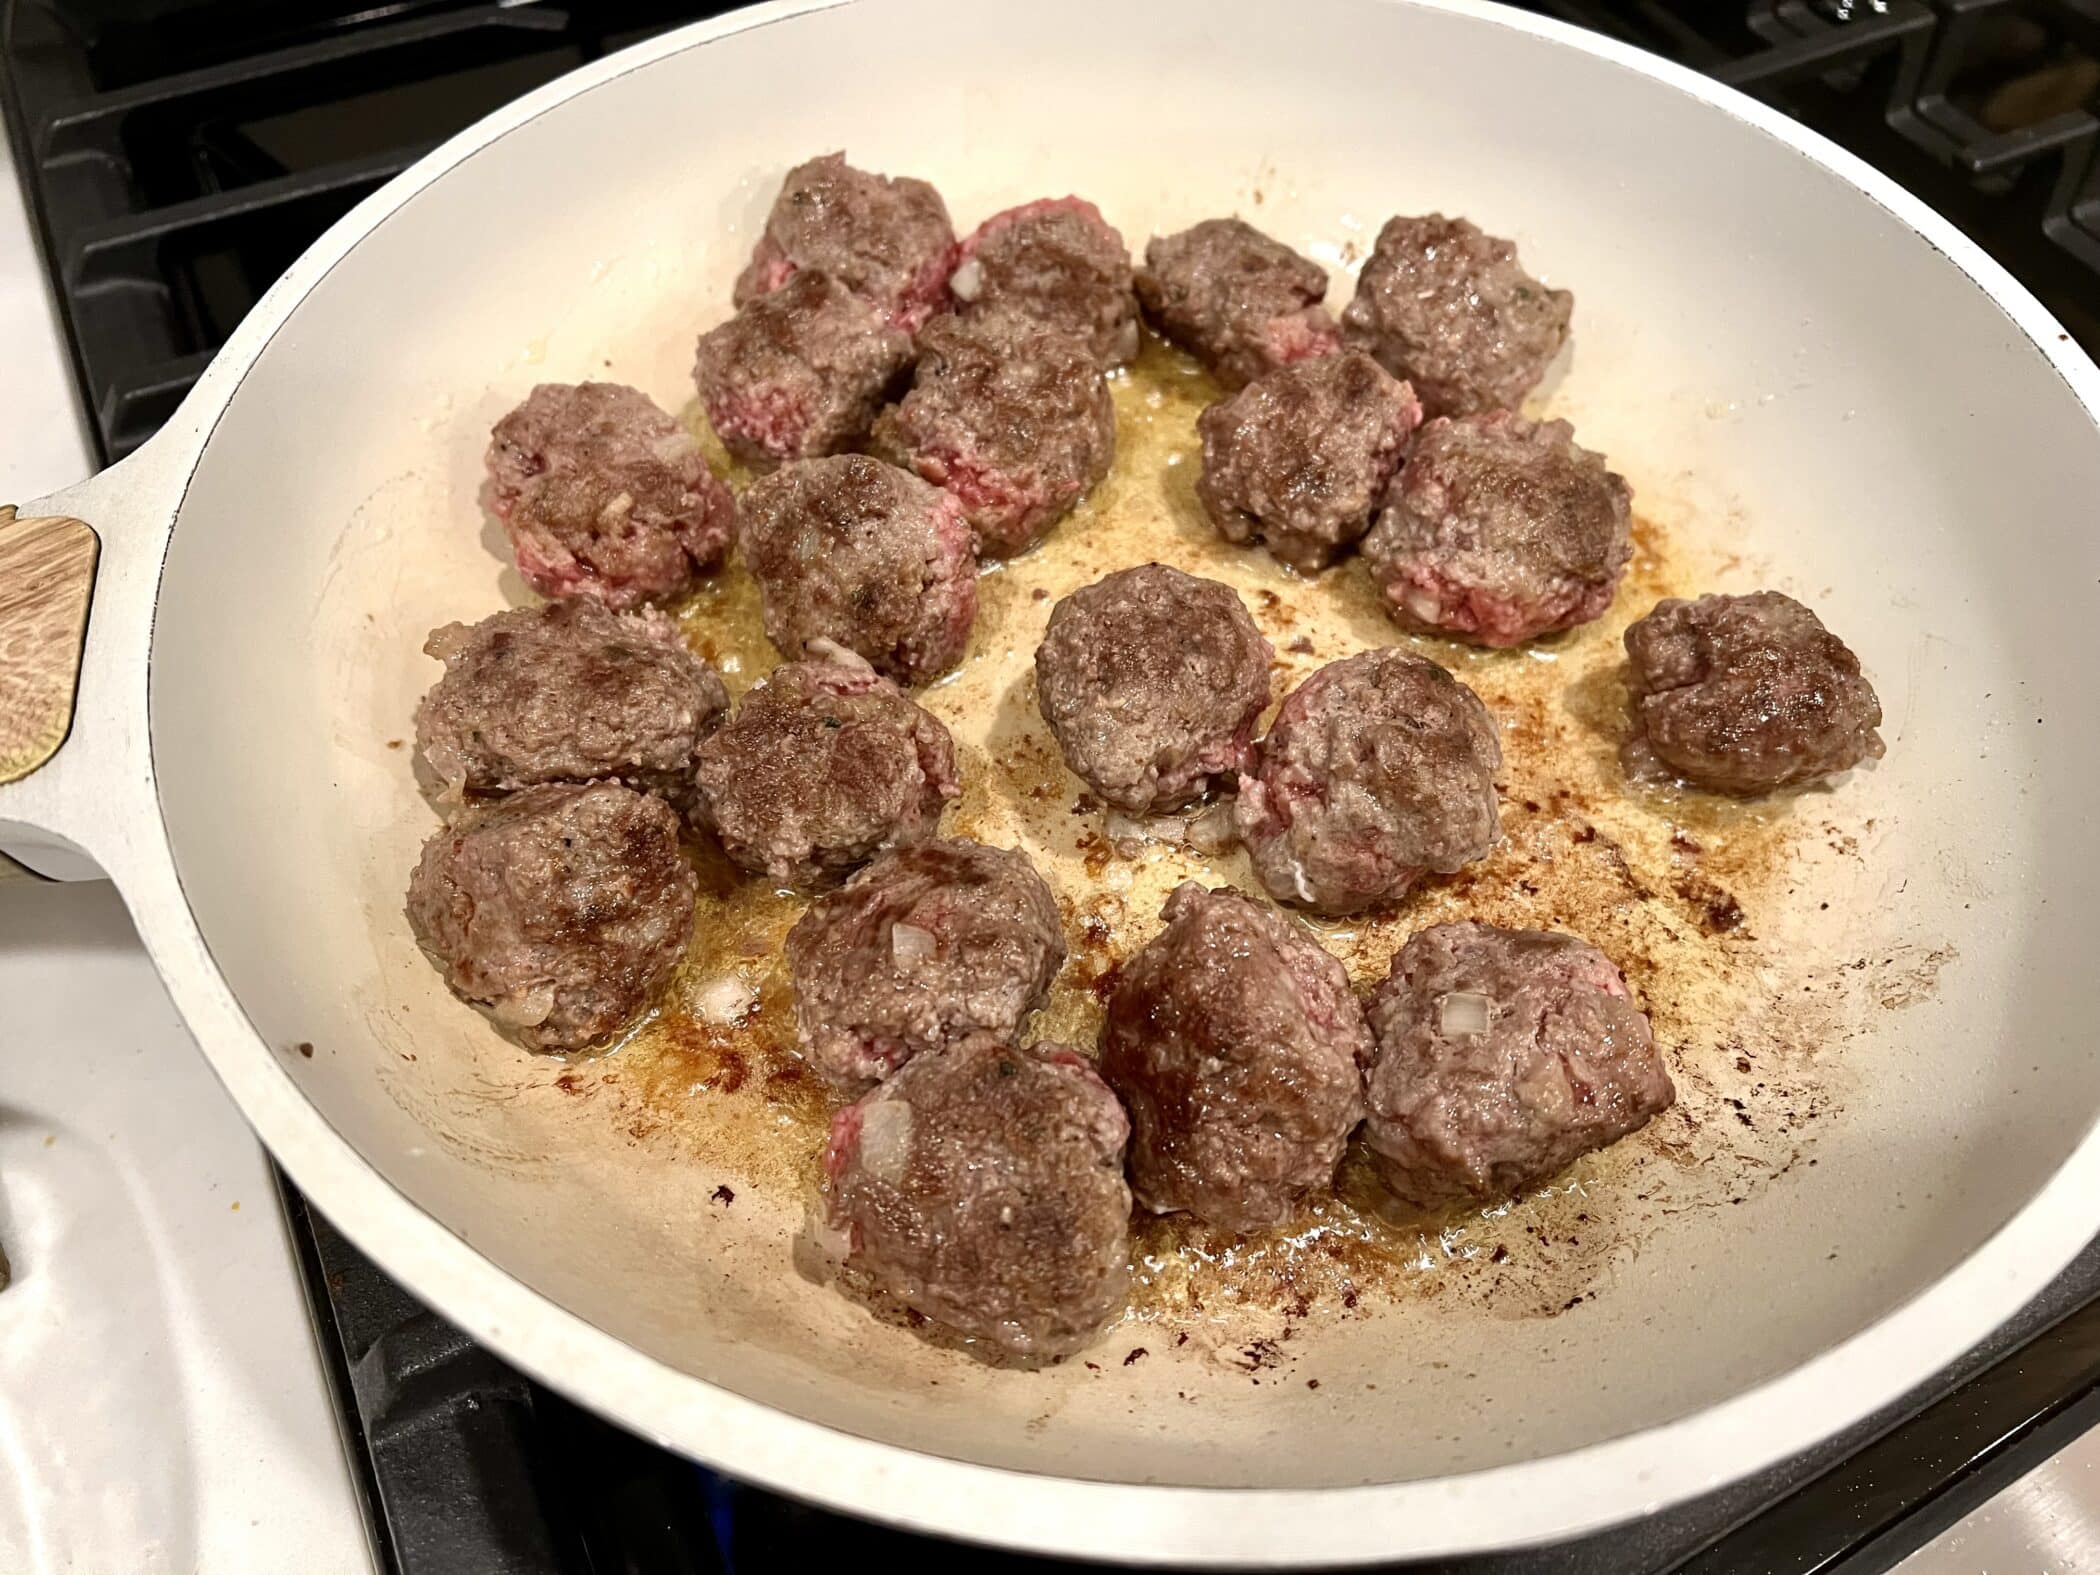 browning the meatballs in a skillet